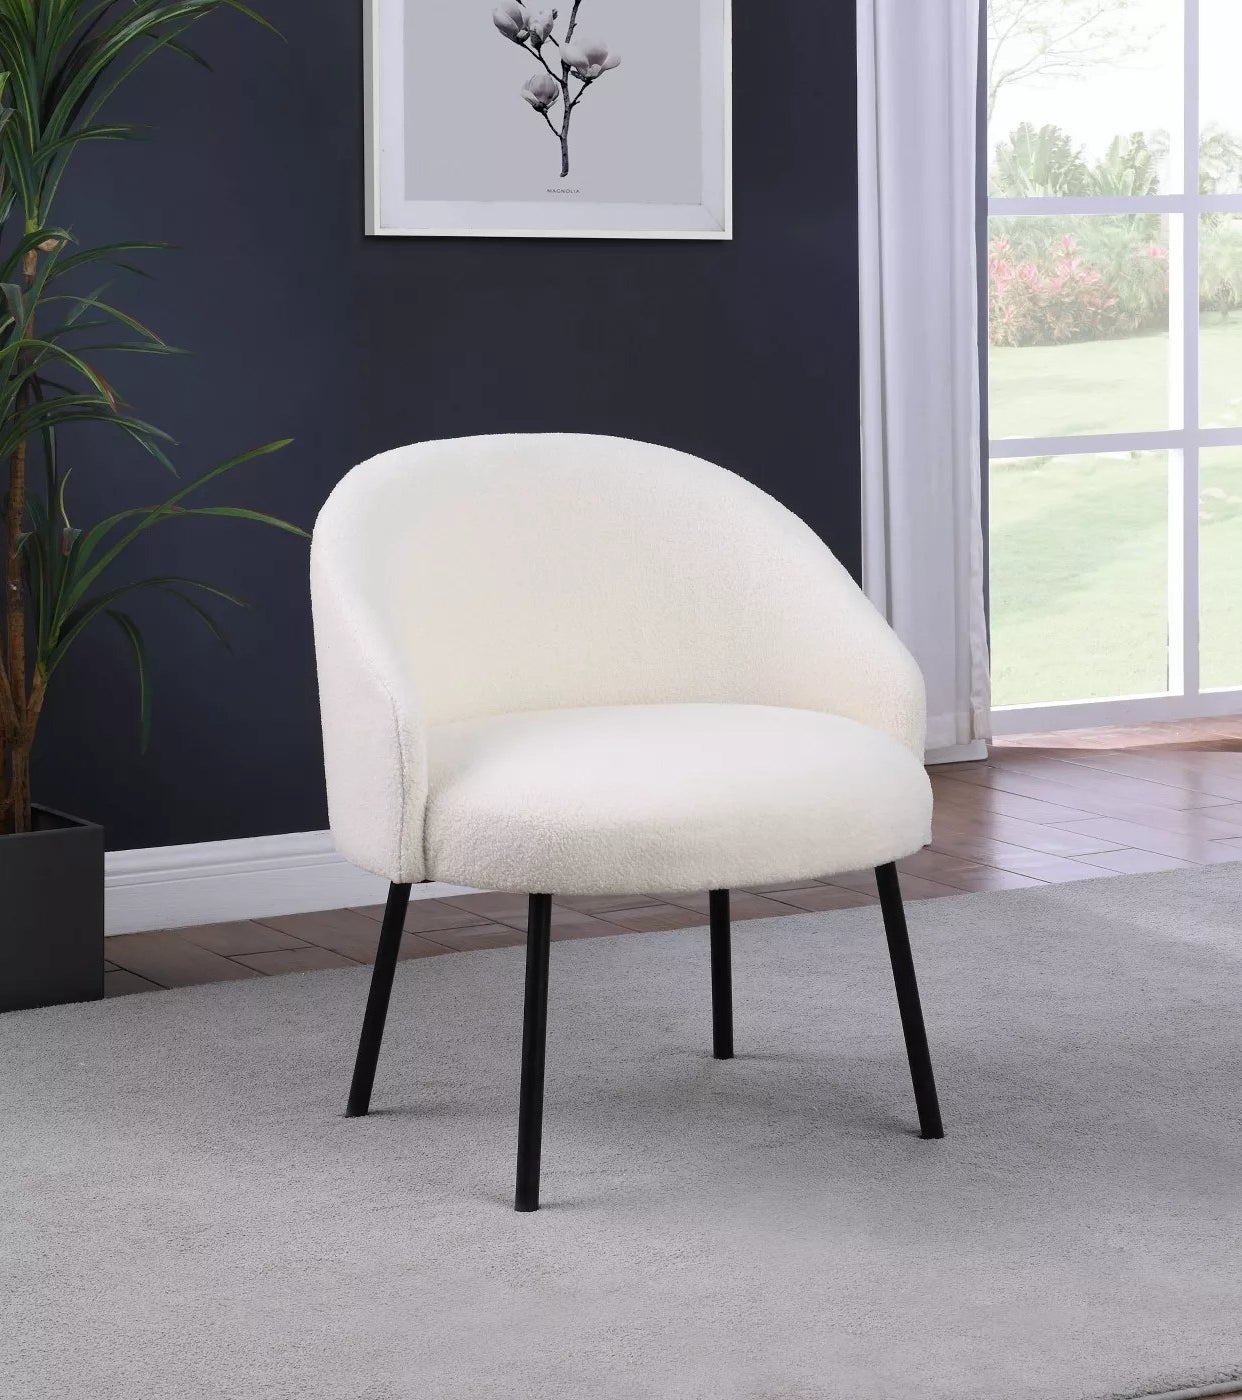 The white chair with black legs